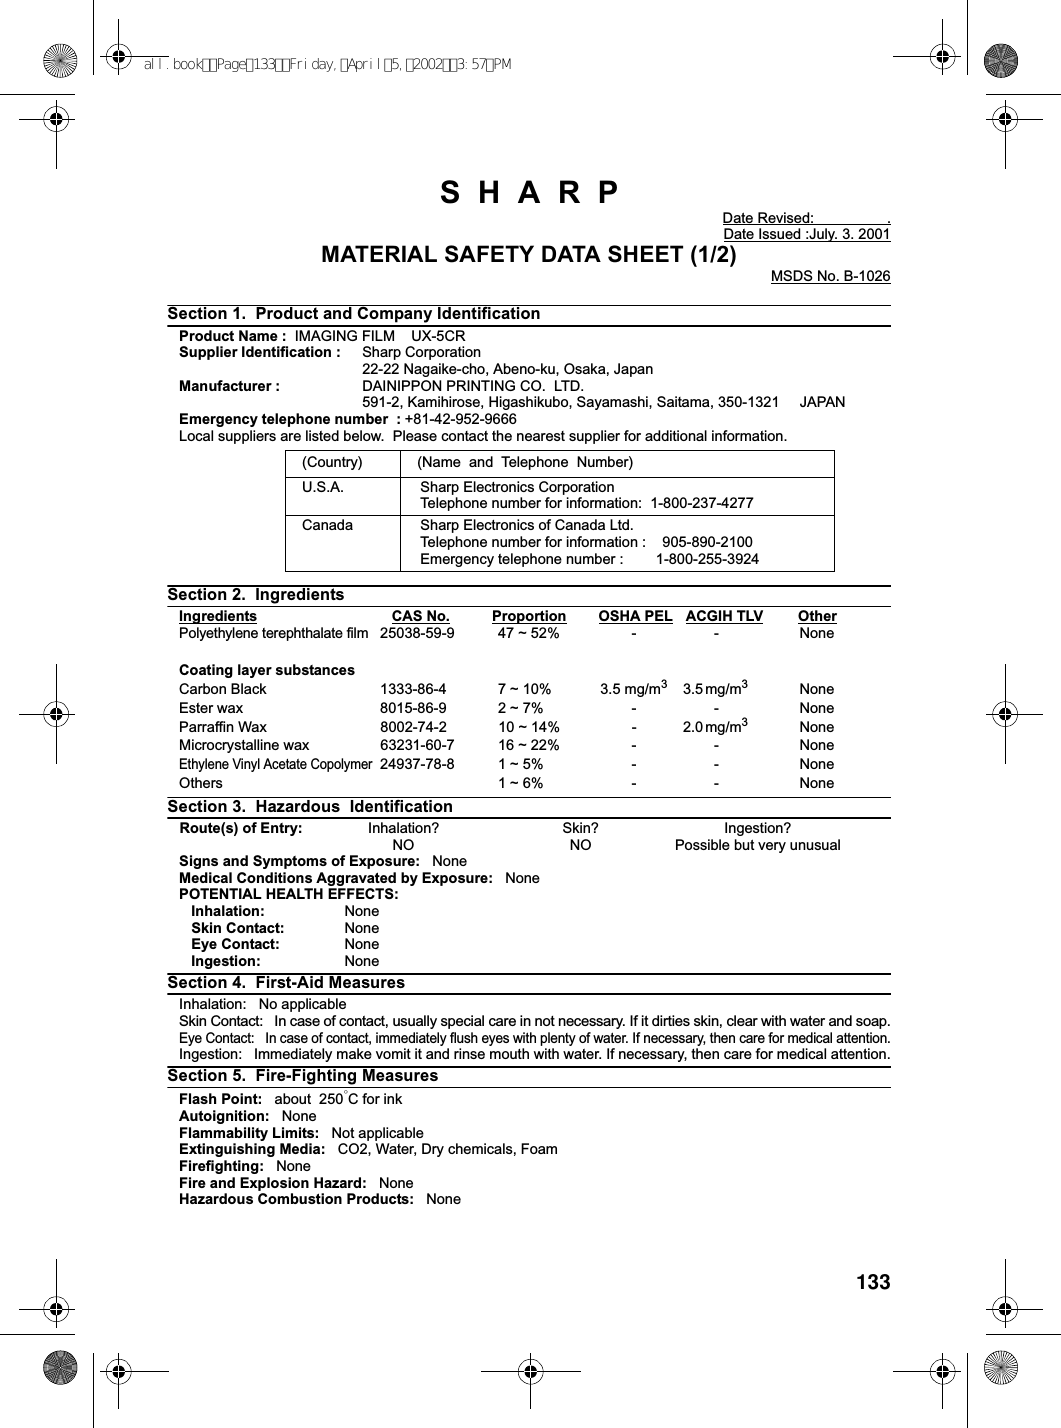 133SHARPDate Revised: .Date Issued :July. 3. 2001MATERIAL SAFETY DATA SHEET (1/2)MSDS No. B-1026Section 1. Product and Company IdentificationProduct Name : IMAGING FILM UX-5CRSupplier Identification : Sharp Corporation22-22 Nagaike-cho, Abeno-ku, Osaka, JapanManufacturer : DAINIPPON PRINTING CO. LTD.591-2, Kamihirose, Higashikubo, Sayamashi, Saitama, 350-1321 JAPANEmergency telephone number : +81-42-952-9666Local suppliers are listed below. Please contact the nearest supplier for additional information.Section 2. IngredientsIngredients CAS No. Proportion OSHA PEL ACGIH TLV OtherPolyethylene terephthalate film25038-59-9 47 ~ 52% - - NoneCoating layer substancesCarbon Black 1333-86-4 7 ~ 10% 3.5 mg/m33.5 mg/m3NoneEster wax 8015-86-9 2 ~ 7% - - NoneParraffin Wax 8002-74-2 10 ~ 14% - 2.0 mg/m3NoneMicrocrystalline wax 63231-60-7 16 ~ 22% - - NoneEthylene Vinyl Acetate Copolymer24937-78-8 1 ~ 5% - - NoneOthers 1 ~ 6% - - NoneSection 3. Hazardous IdentificationRoute(s) of Entry: Inhalation? Skin? Ingestion?NO NO Possible but very unusualSigns and Symptoms of Exposure: NoneMedical Conditions Aggravated by Exposure: NonePOTENTIAL HEALTH EFFECTS:Inhalation: NoneSkin Contact: NoneEye Contact: NoneIngestion: NoneSection 4. First-Aid MeasuresInhalation: No applicableSkin Contact: In case of contact, usually special care in not necessary. If it dirties skin, clear with water and soap.Eye Contact: In case of contact, immediately flush eyes with plenty of water. If necessary, then care for medical attention.Ingestion: Immediately make vomit it and rinse mouth with water. If necessary, then care for medical attention.Section 5. Fire-Fighting MeasuresFlash Point: about 250°CforinkAutoignition: NoneFlammability Limits: Not applicableExtinguishing Media: CO2, Water, Dry chemicals, FoamFirefighting: NoneFire and Explosion Hazard: NoneHazardous Combustion Products: None(Country) (Name and Telephone Number)U.S.A. Sharp Electronics CorporationTelephone number for information: 1-800-237-4277Canada Sharp Electronics of Canada Ltd.Telephone number for information : 905-890-2100Emergency telephone number : 1-800-255-3924all.bookPage133Friday,April5,20023:57PM